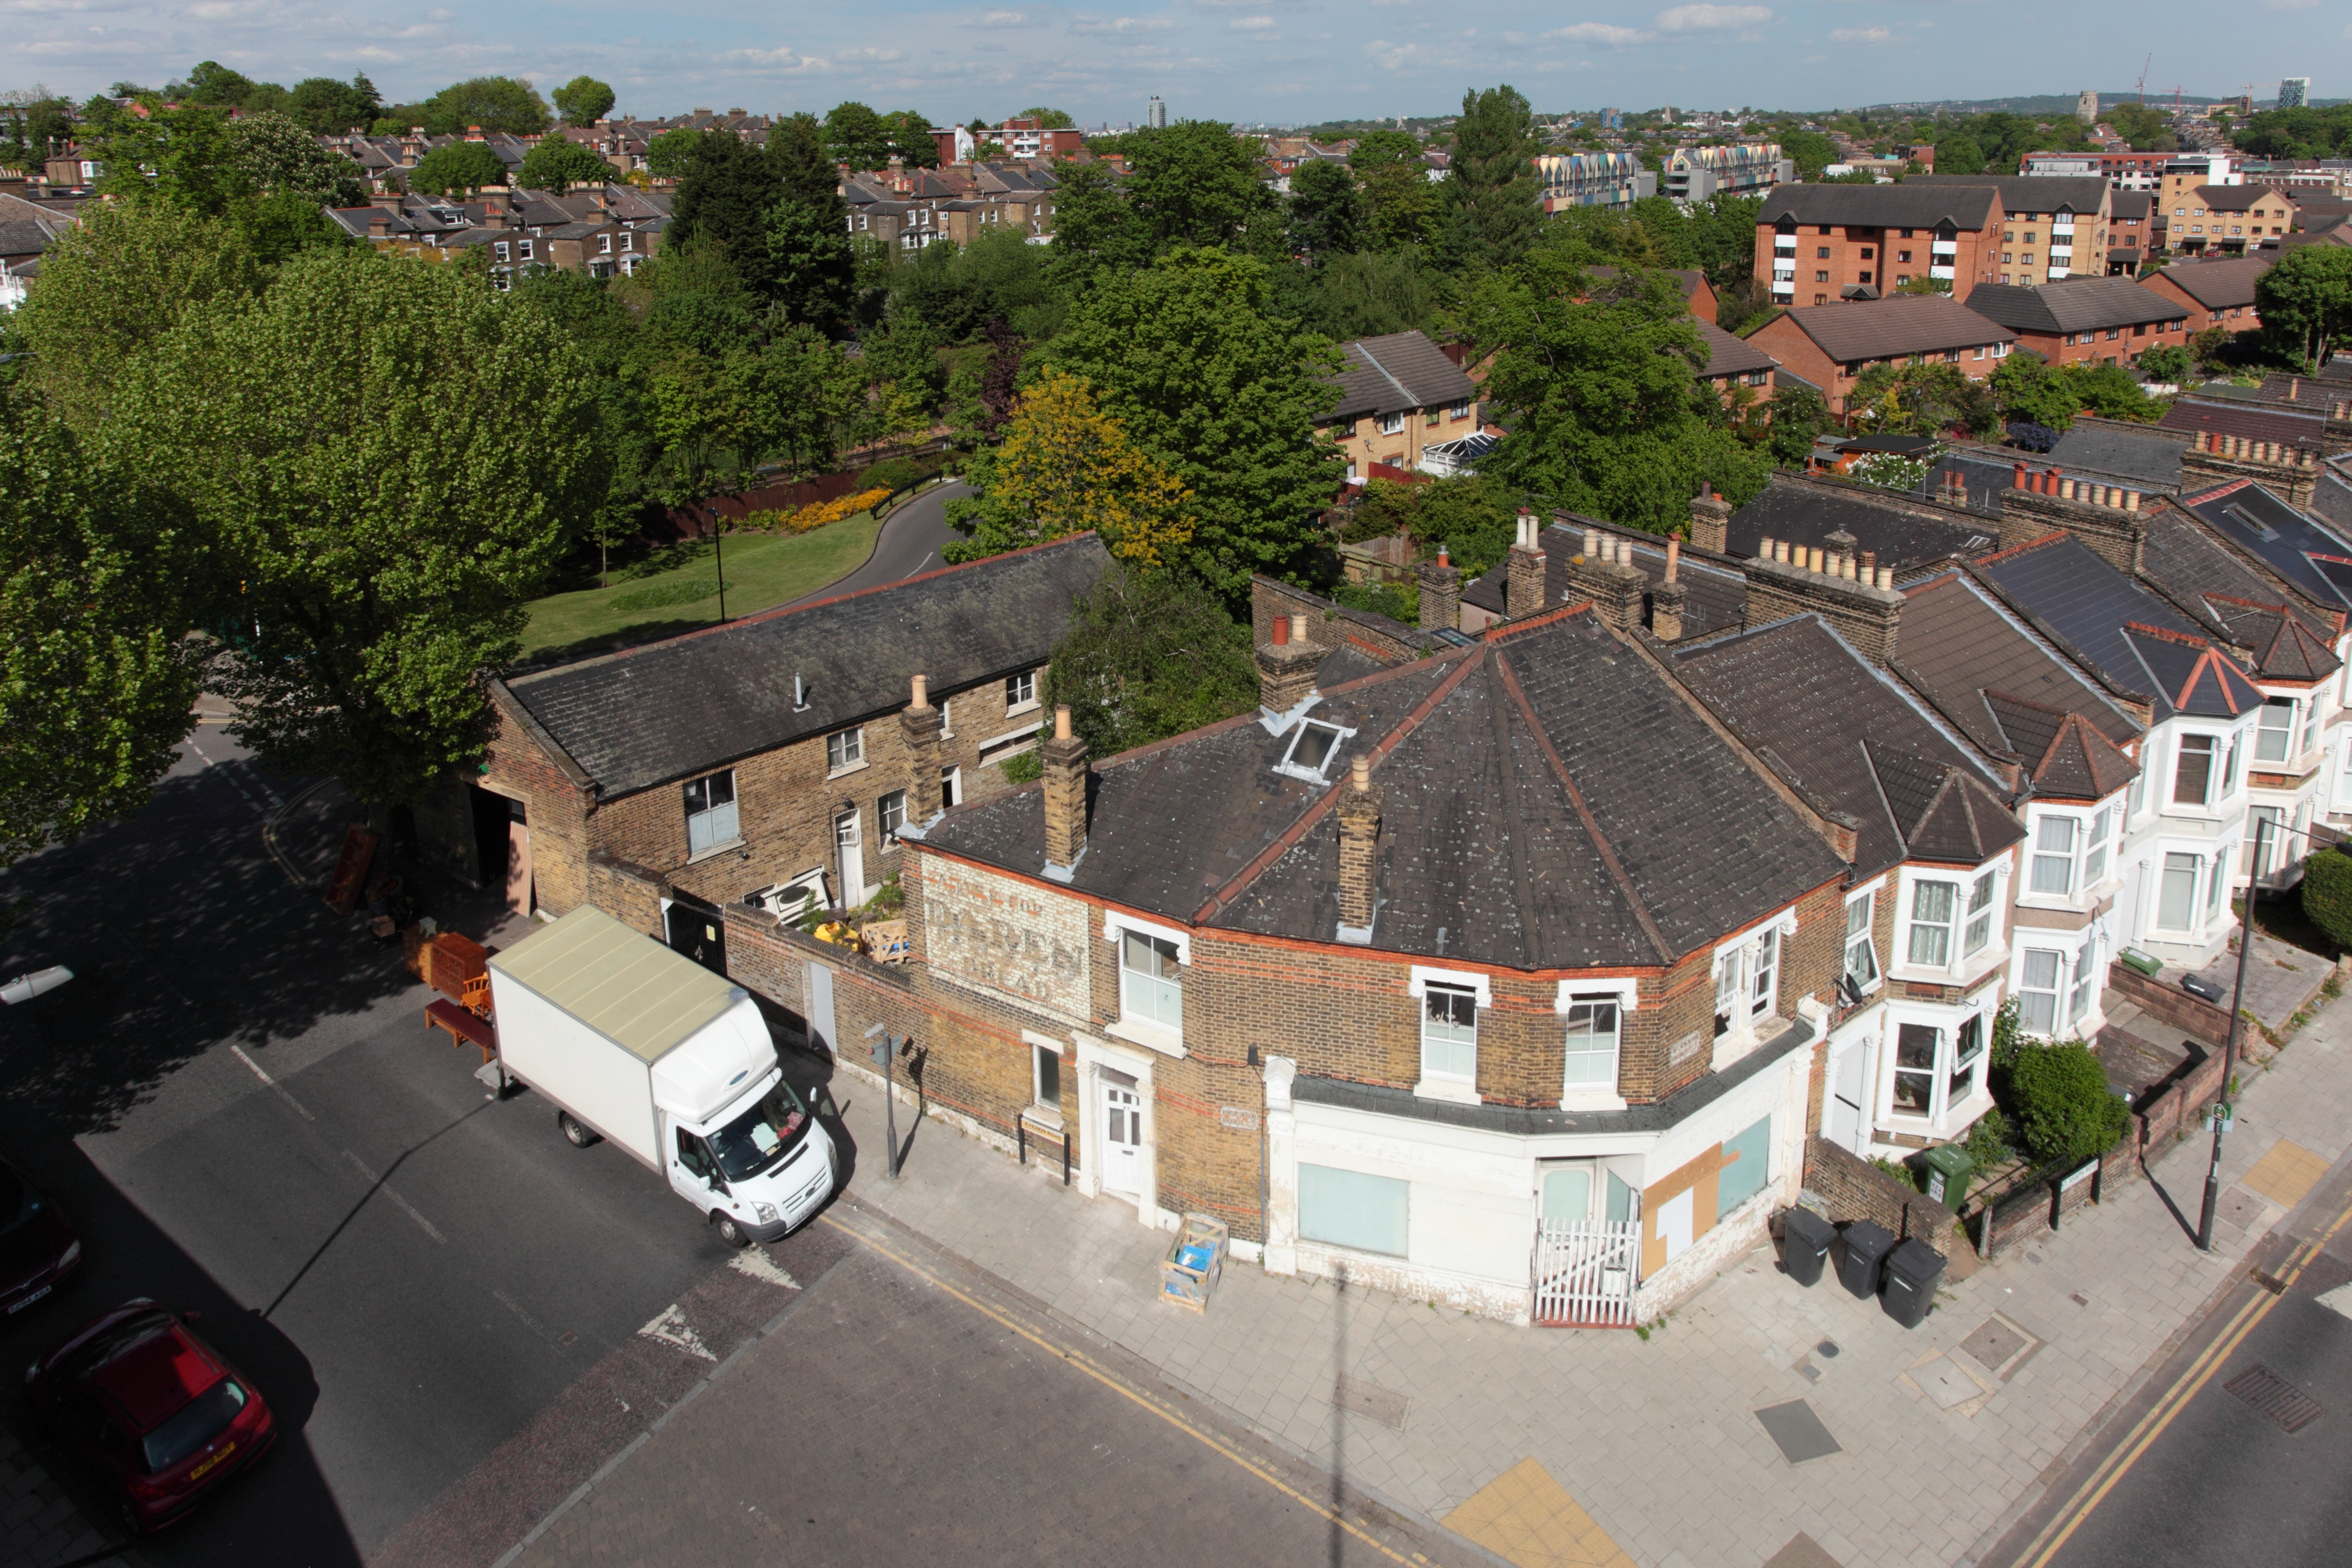 Tenanted corner site comprising retail and residential. Acquired unconditionally. St Asaph Road, SE4. London Borough of Lewisham.